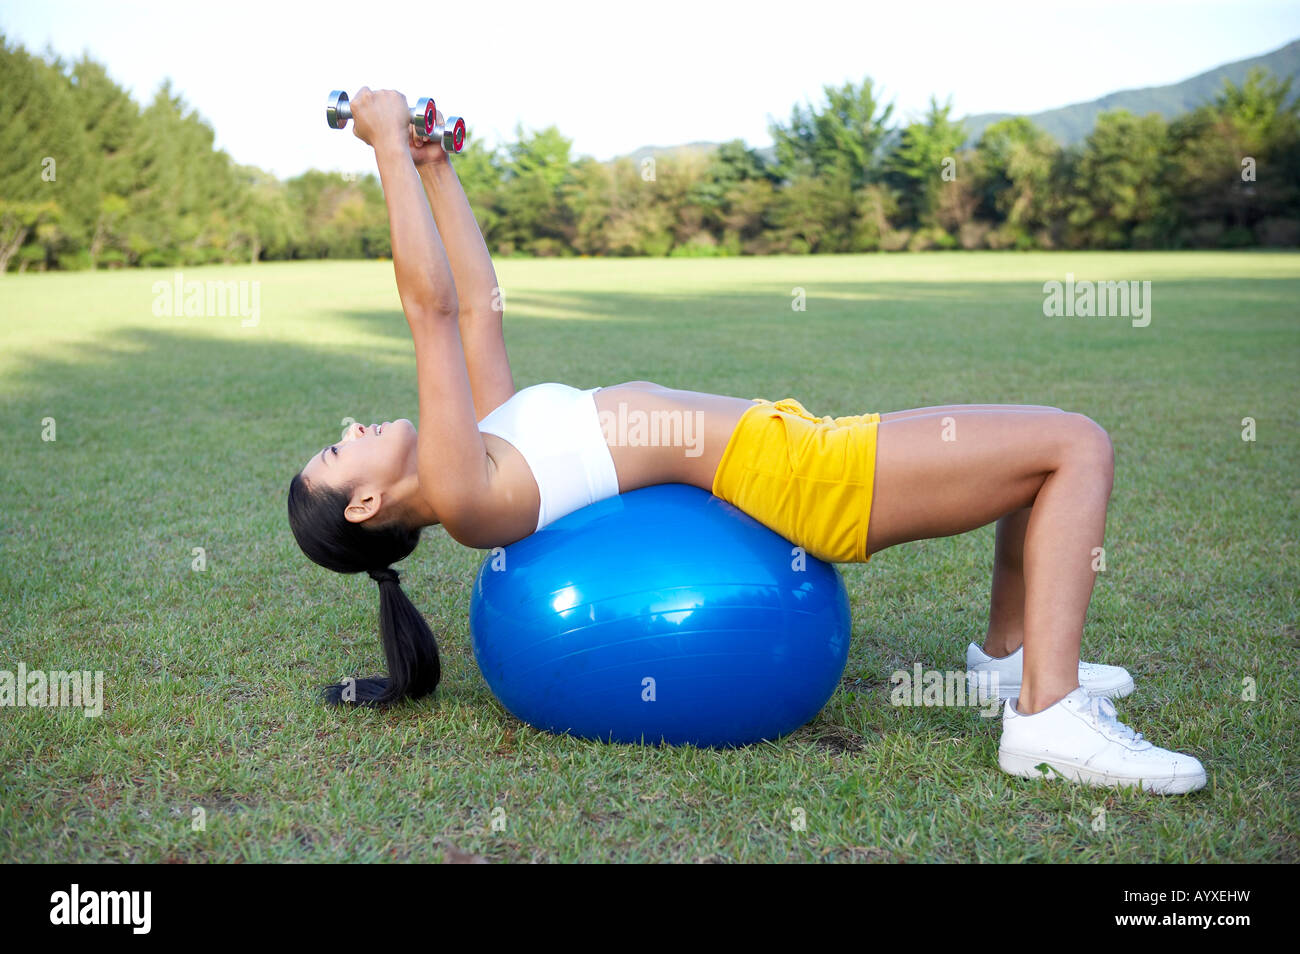 woman excercising with dumbbelll on the gym ball Stock Photo